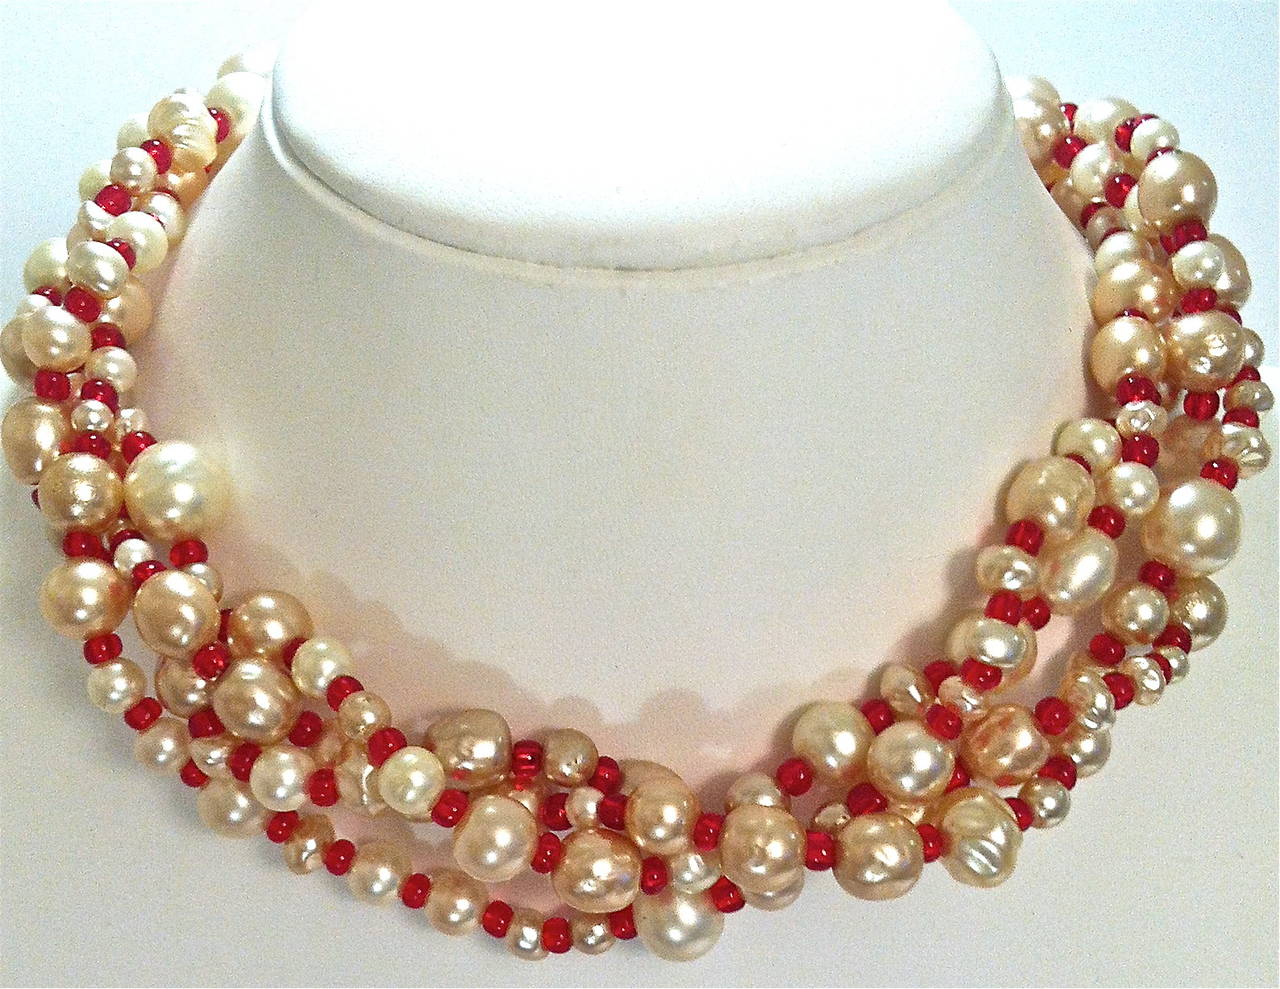 1980s  Original Chanel Necklace by Gripoix. 2